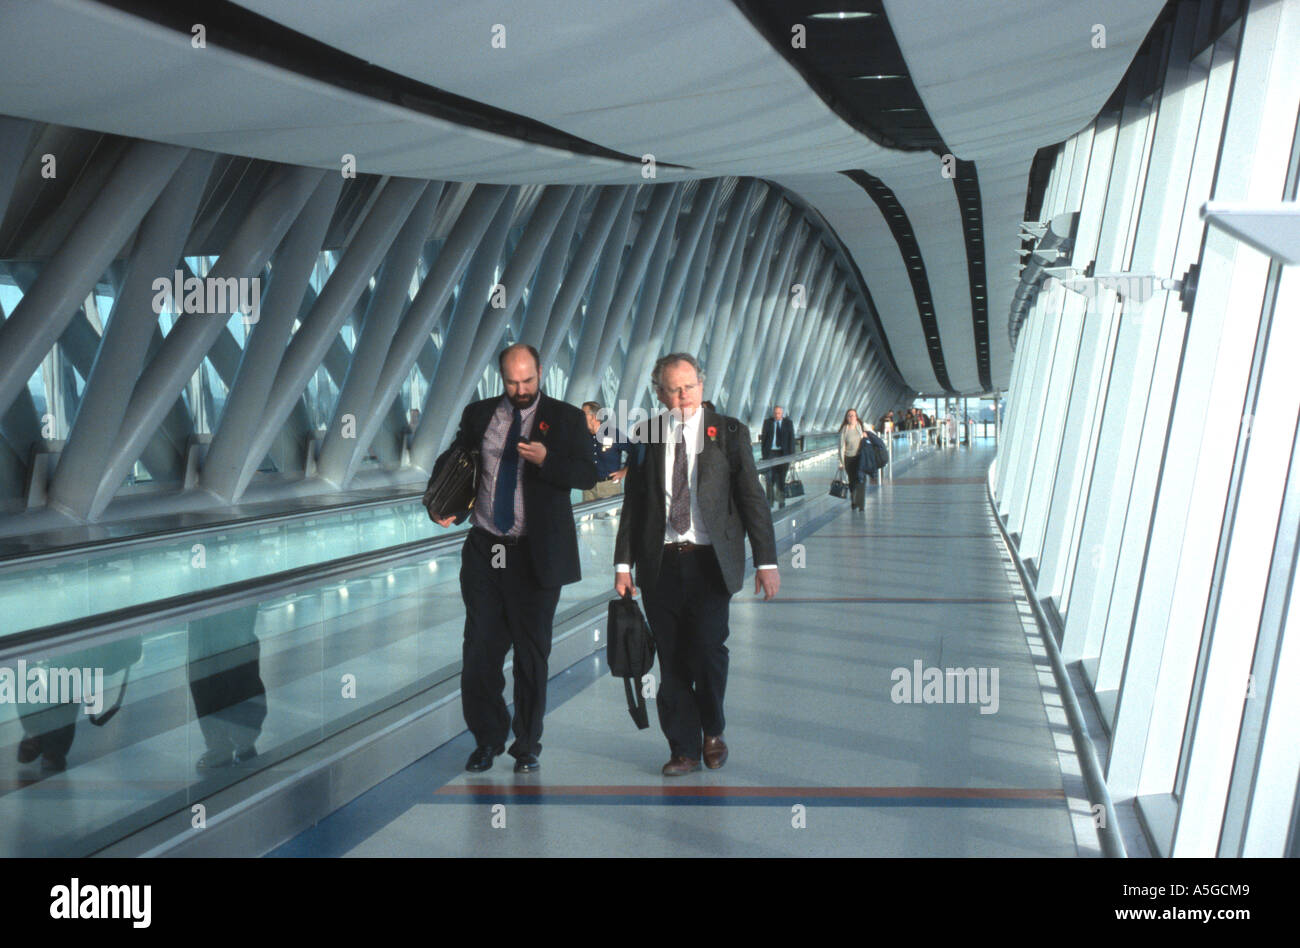 Two businessmen walking across the airbridge LGW Gatwick North Terminal London airports BAA British Airports Authority Stock Photo